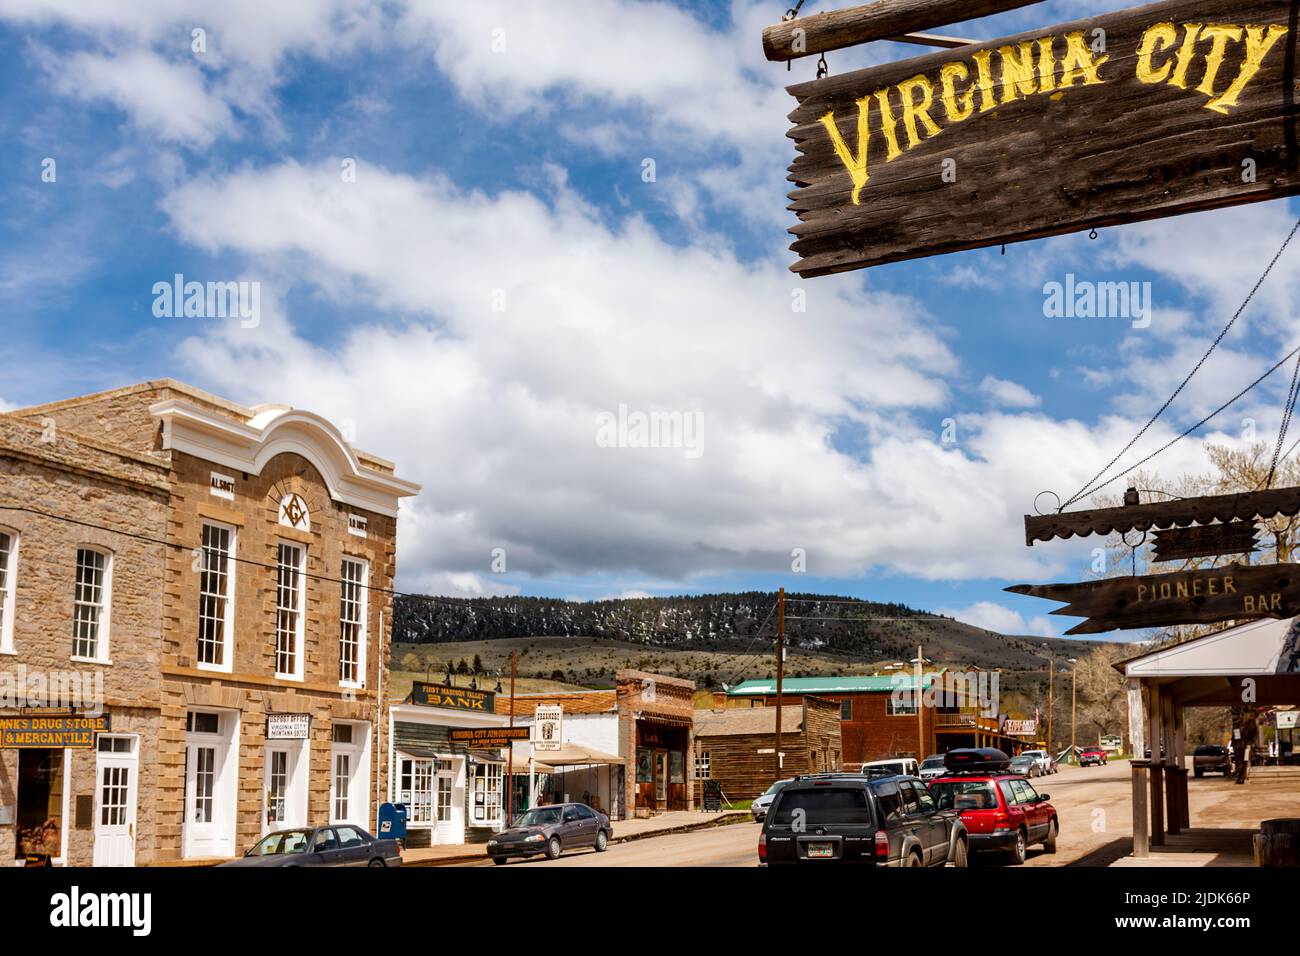 Ghost town at Virginia City is now a tourist attraction in Montana. Deserted log cabins, train wreck yard and gift shops in town. Stock Photo